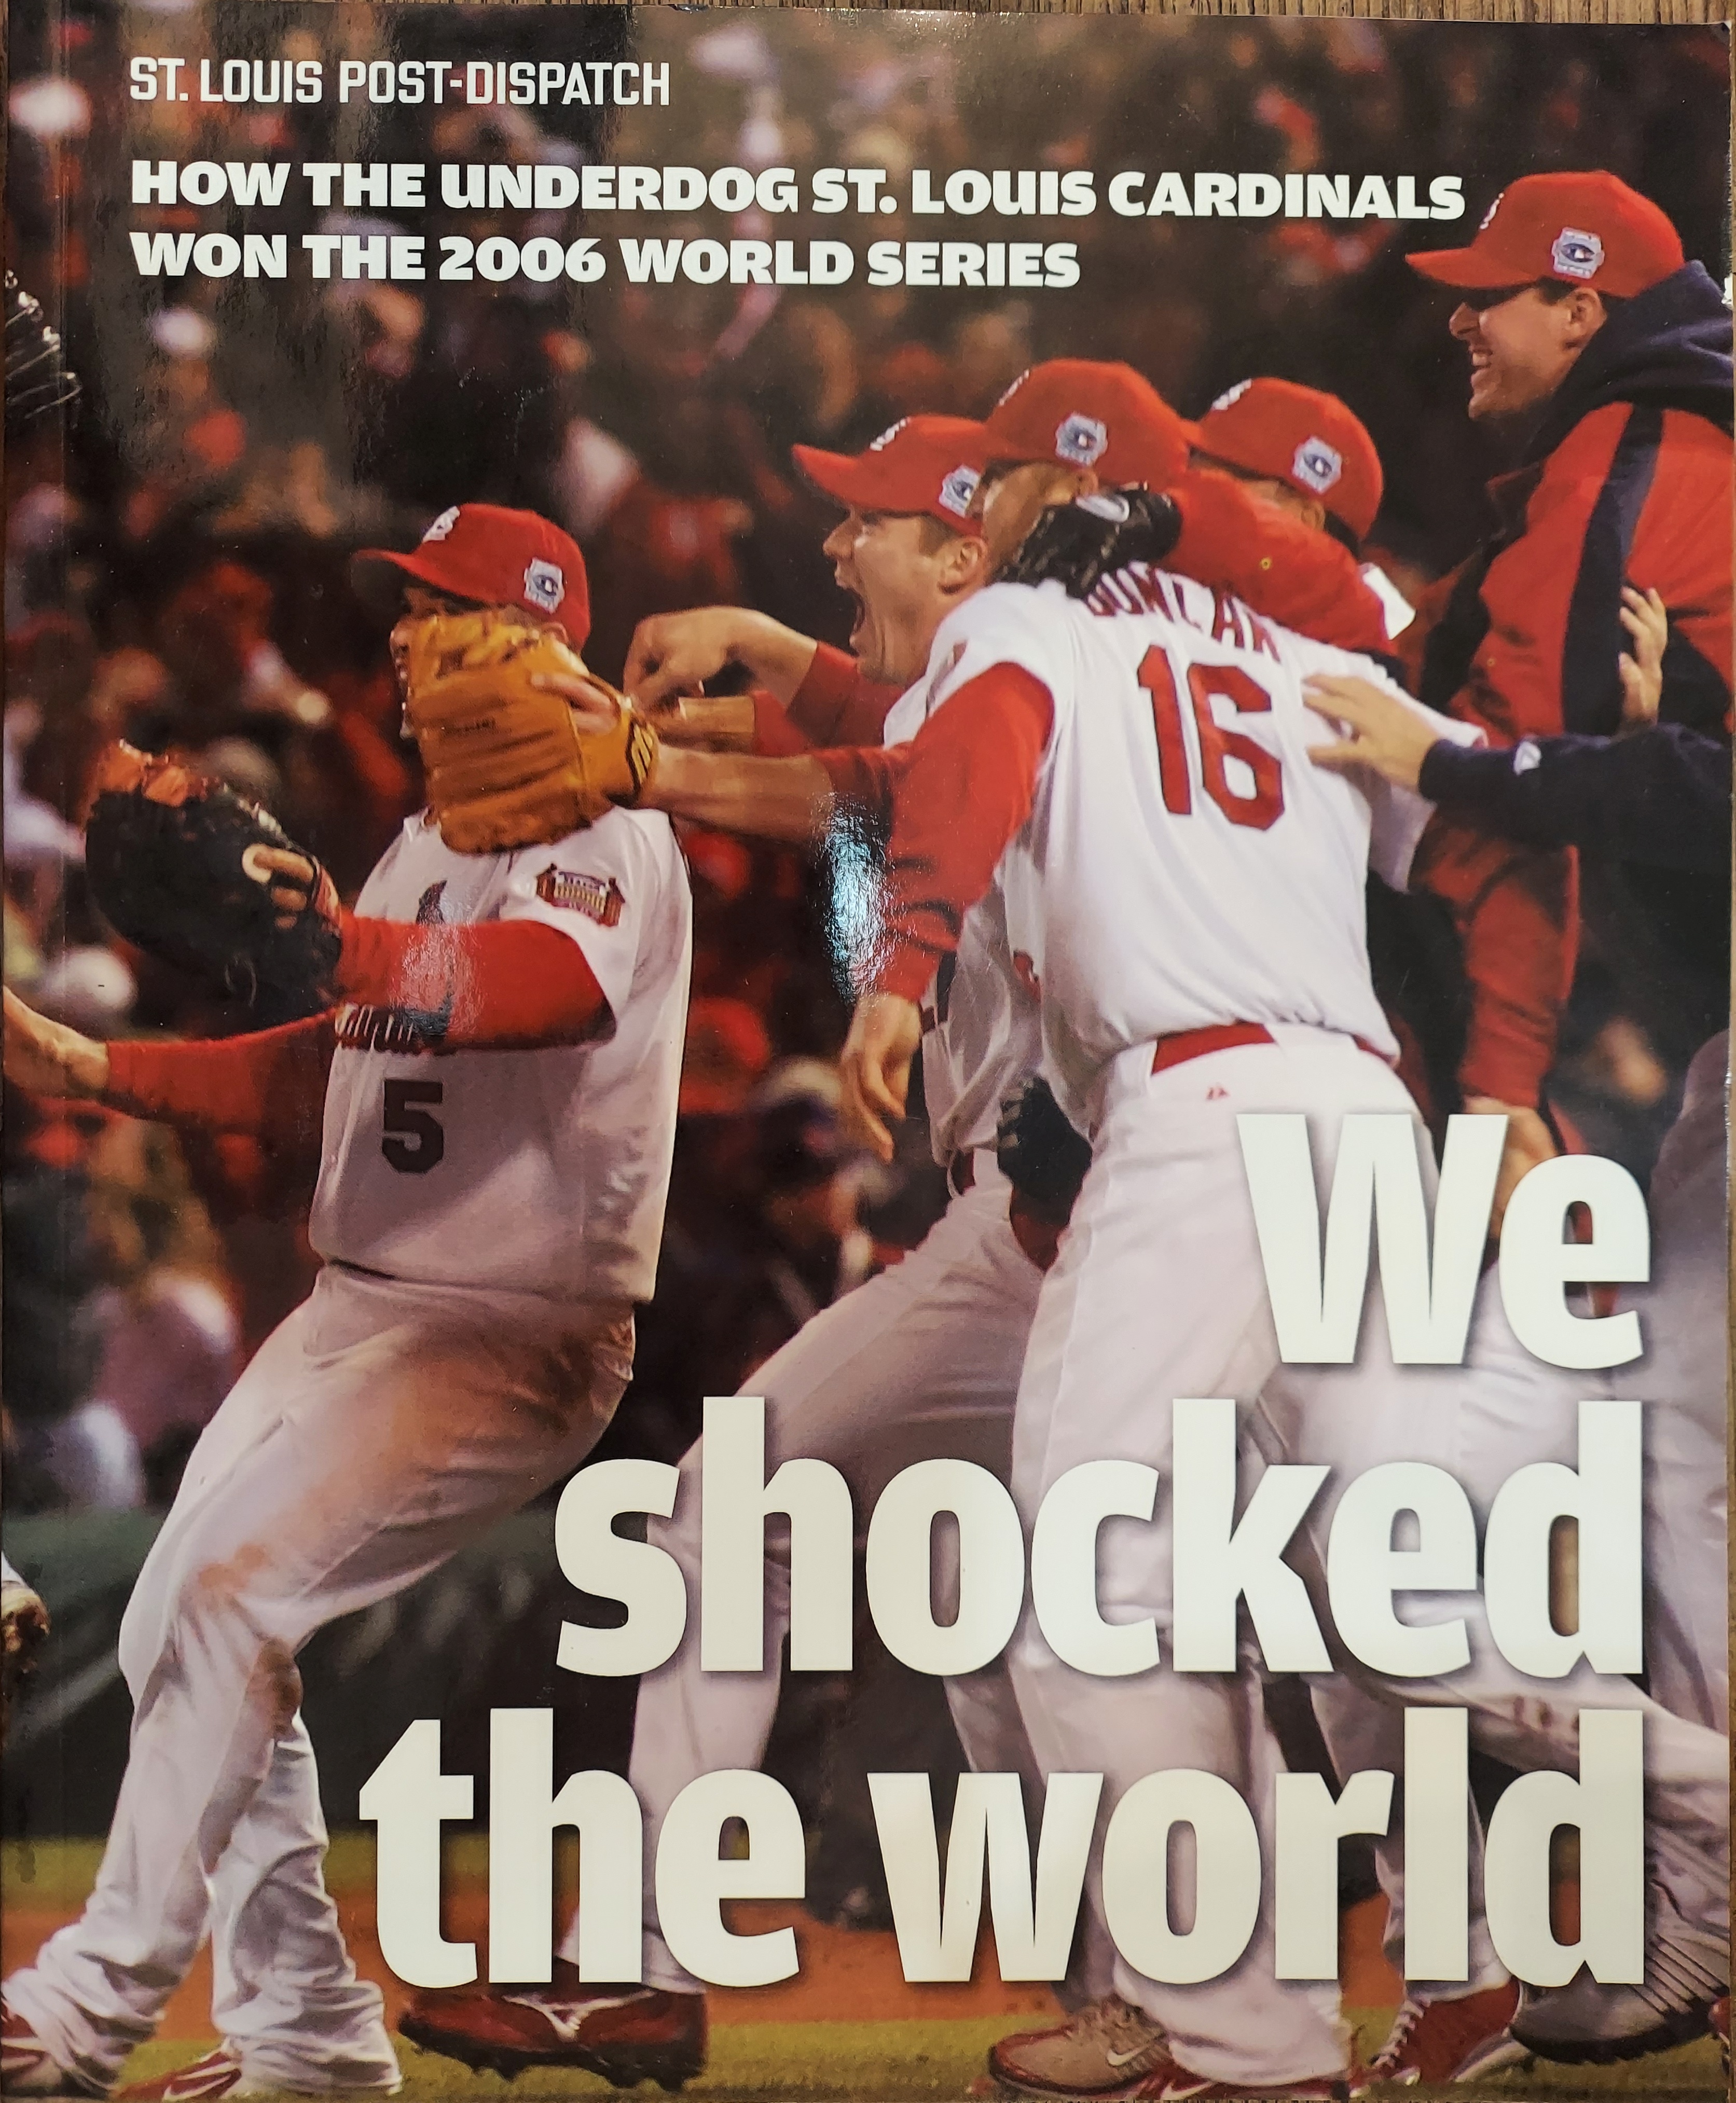 Who won the World Series in 2006?